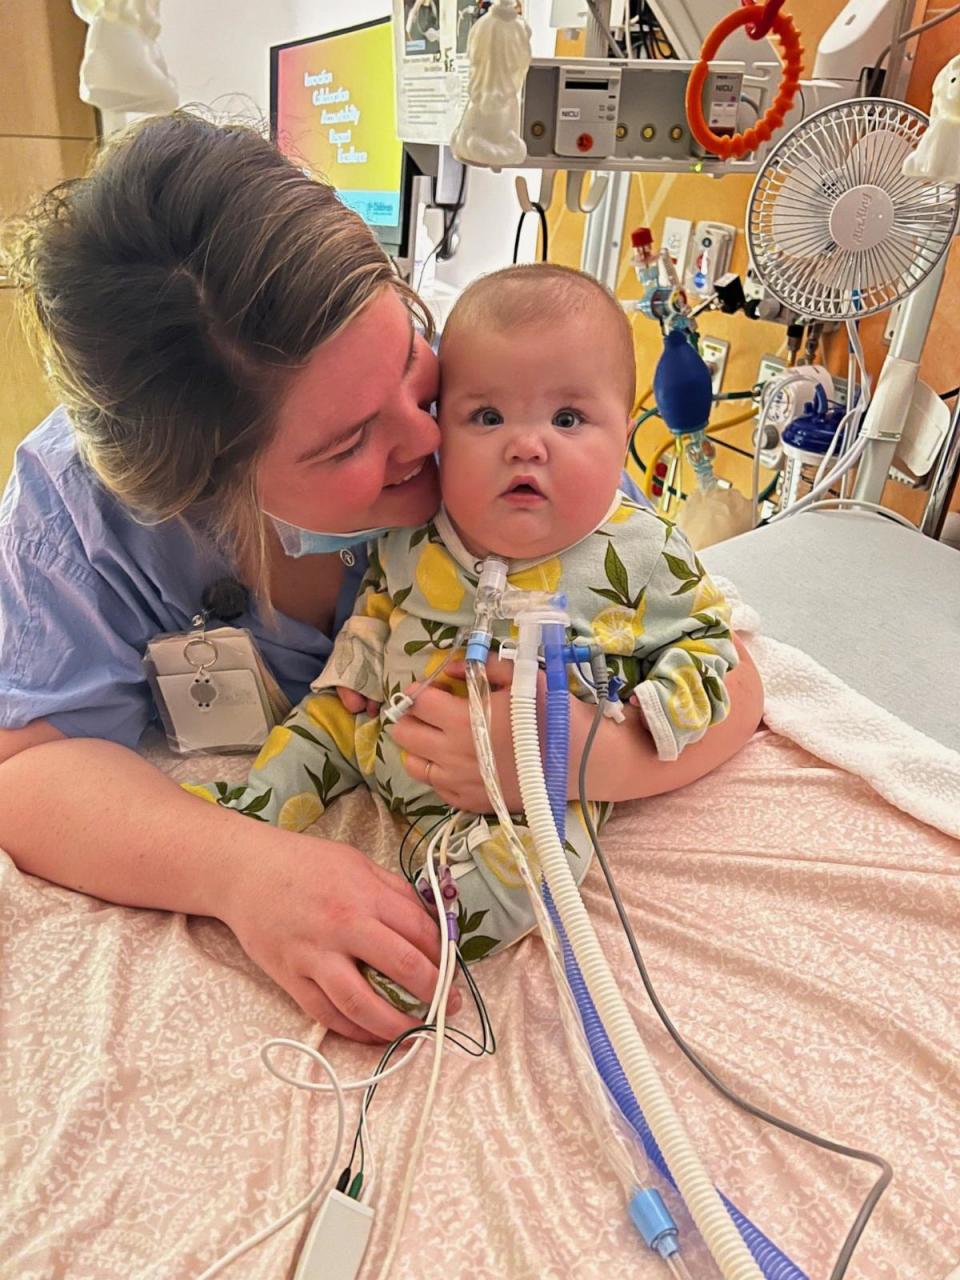 PHOTO: Taylor Deras said she was able to care for Ella and read books to her as one of her NICU nurses before she and Drew Deras fostered and then adopted her. (Taylor Deras)